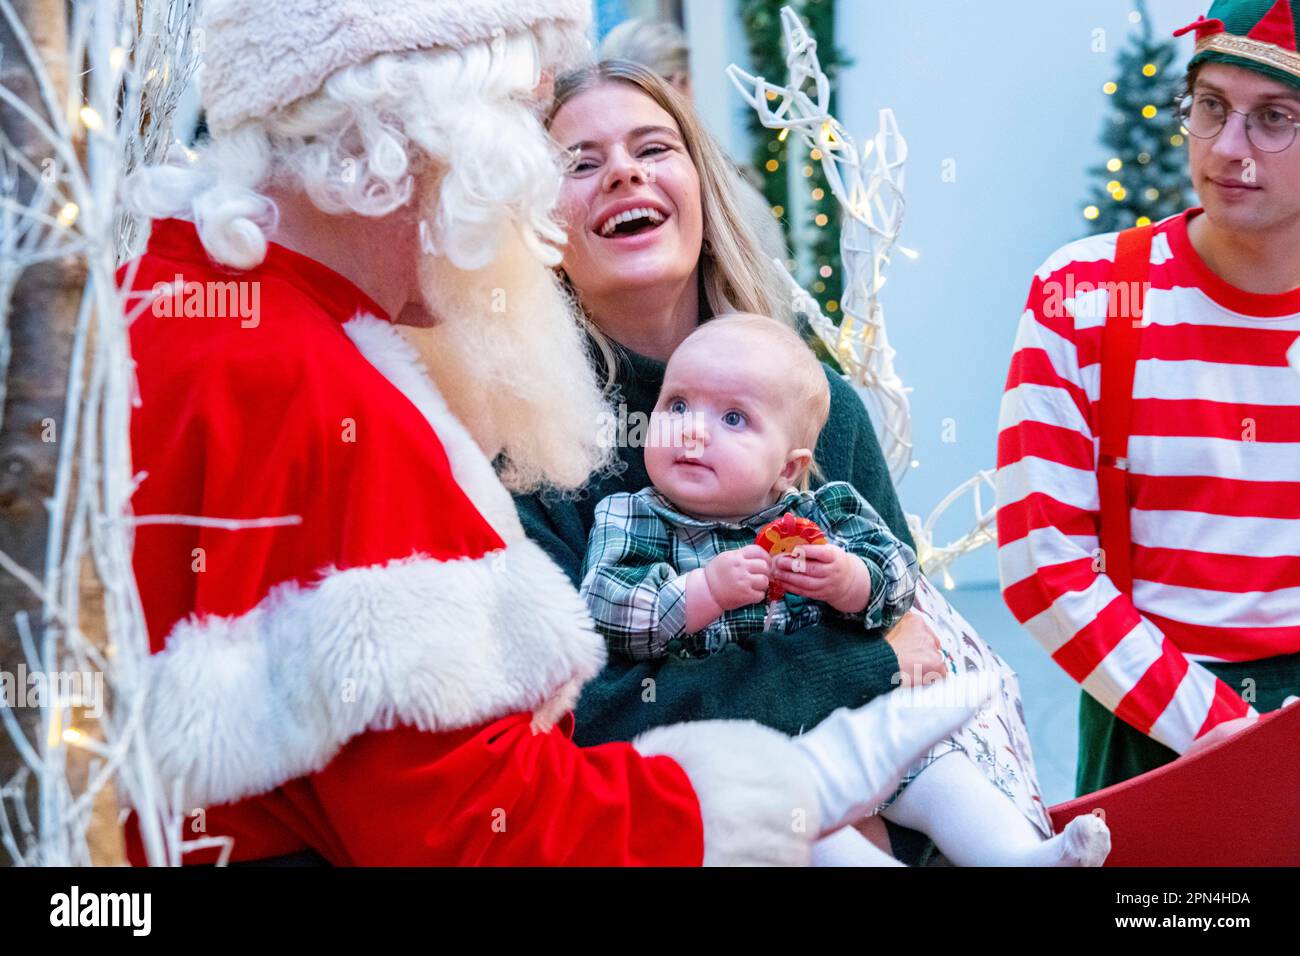 Father Christmas and an elf looking majestic with a mother and daugher in a winter setting Stock Photo